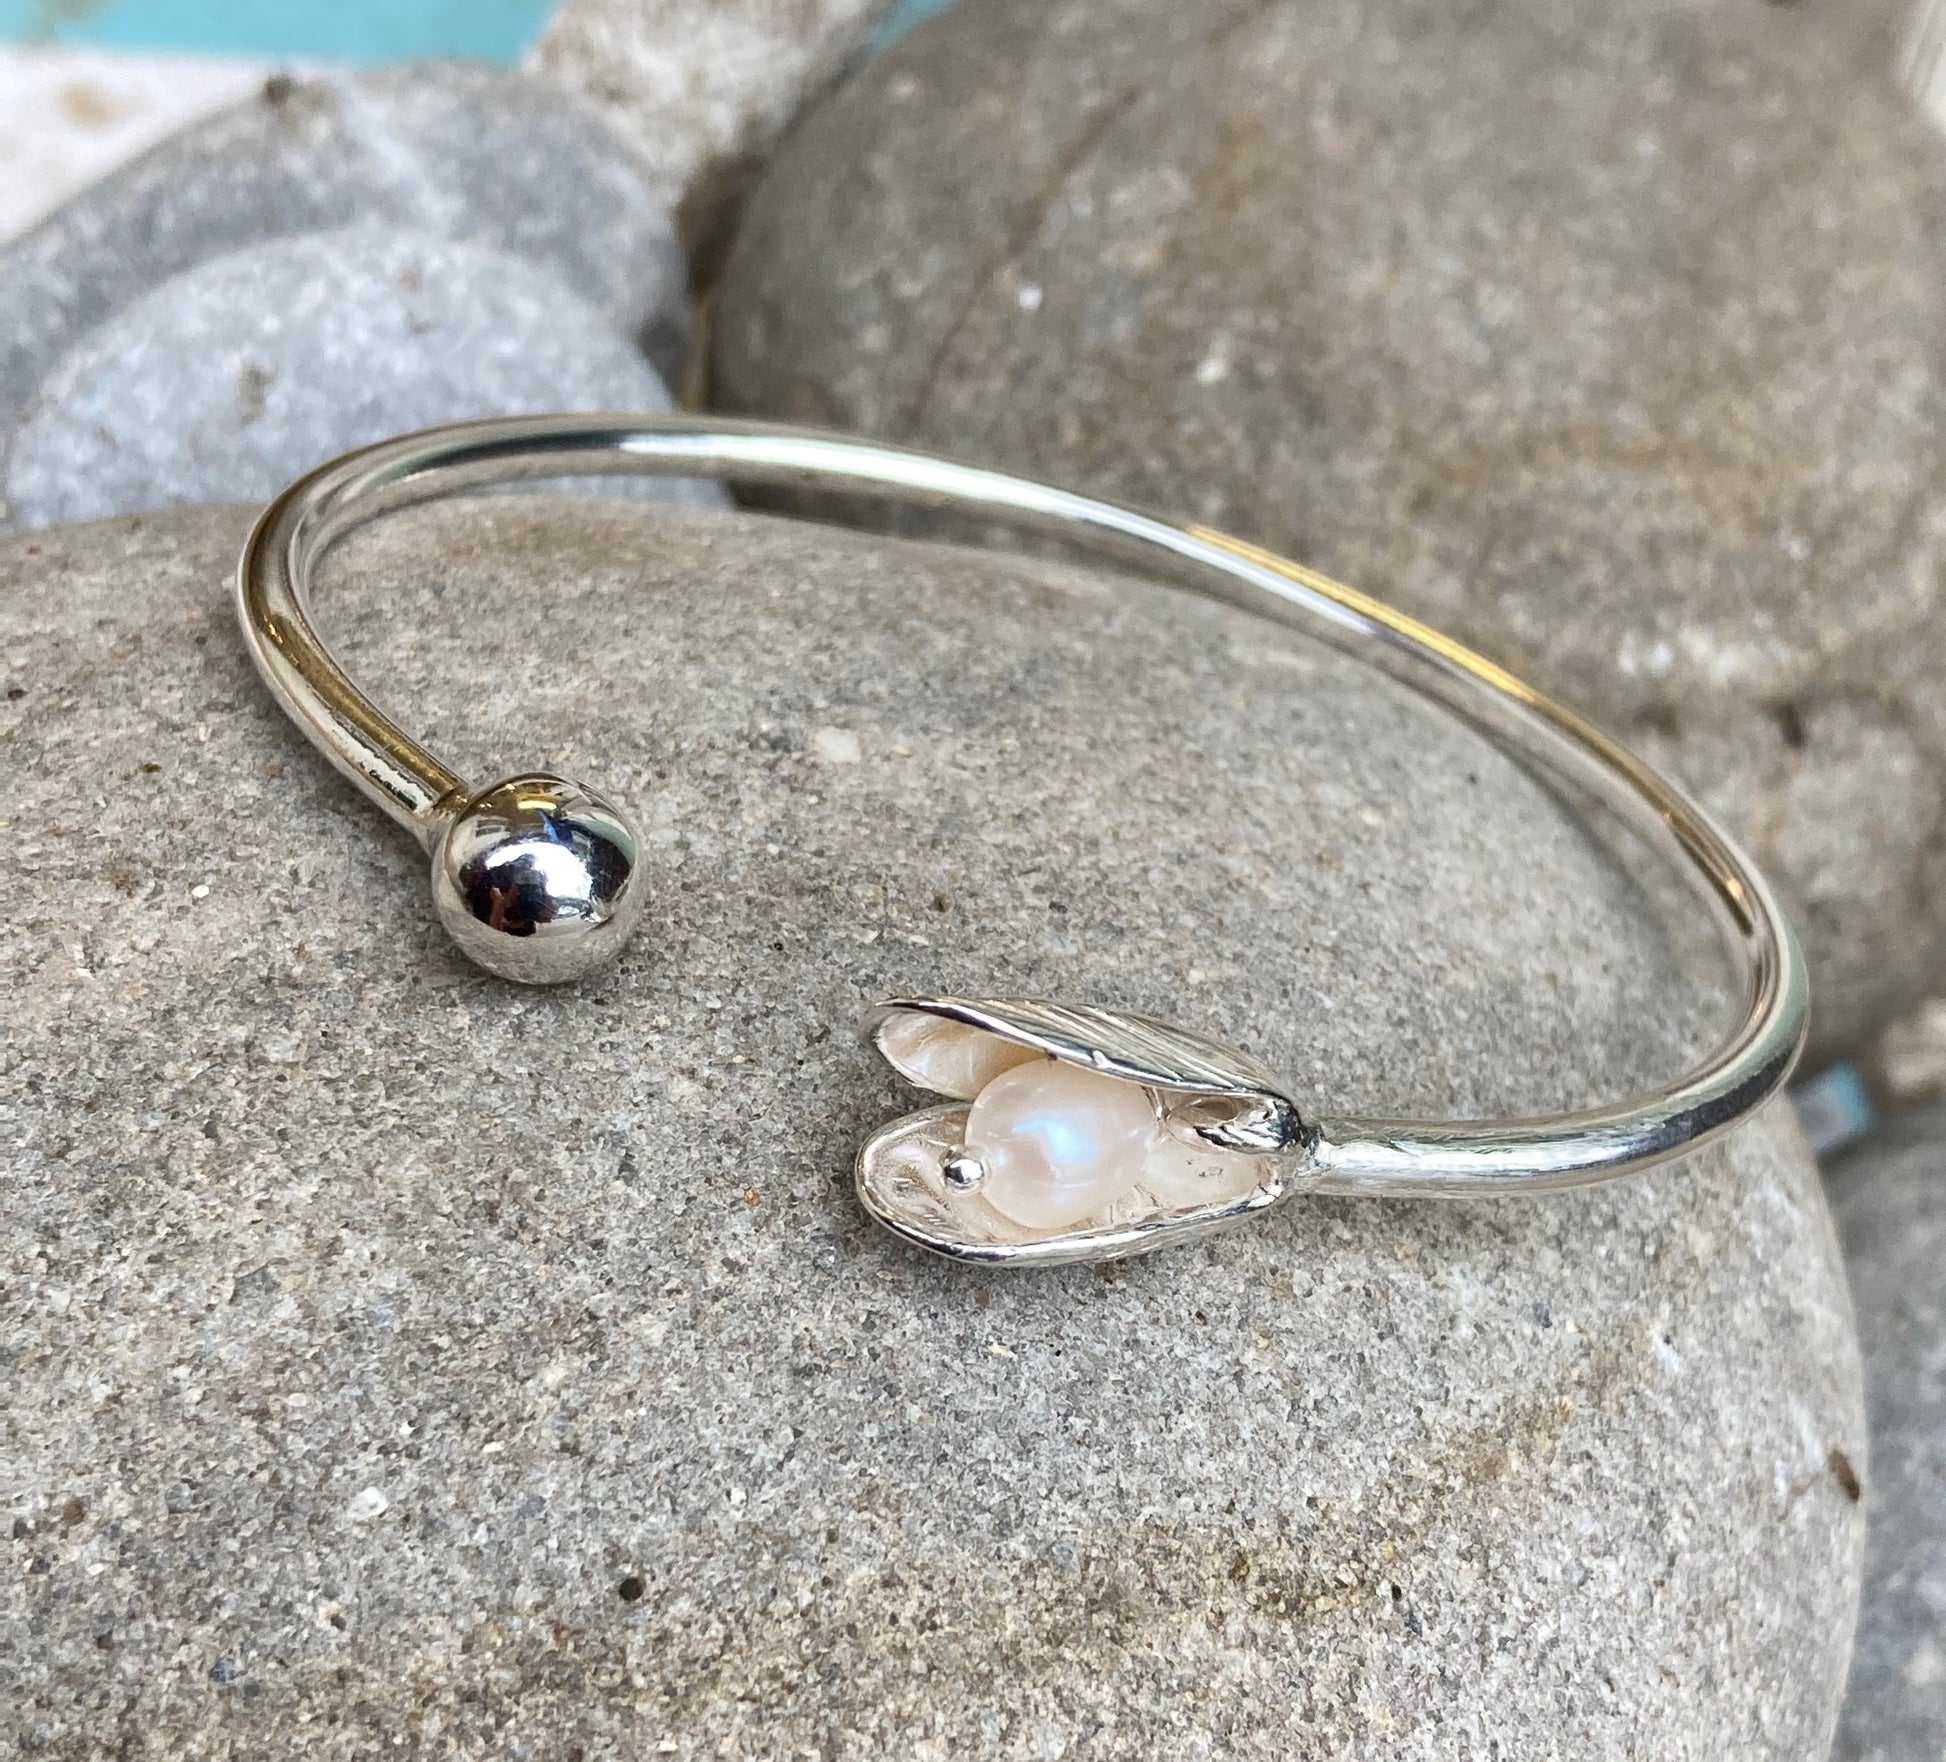 Mussel shell and pearl cuff bangle